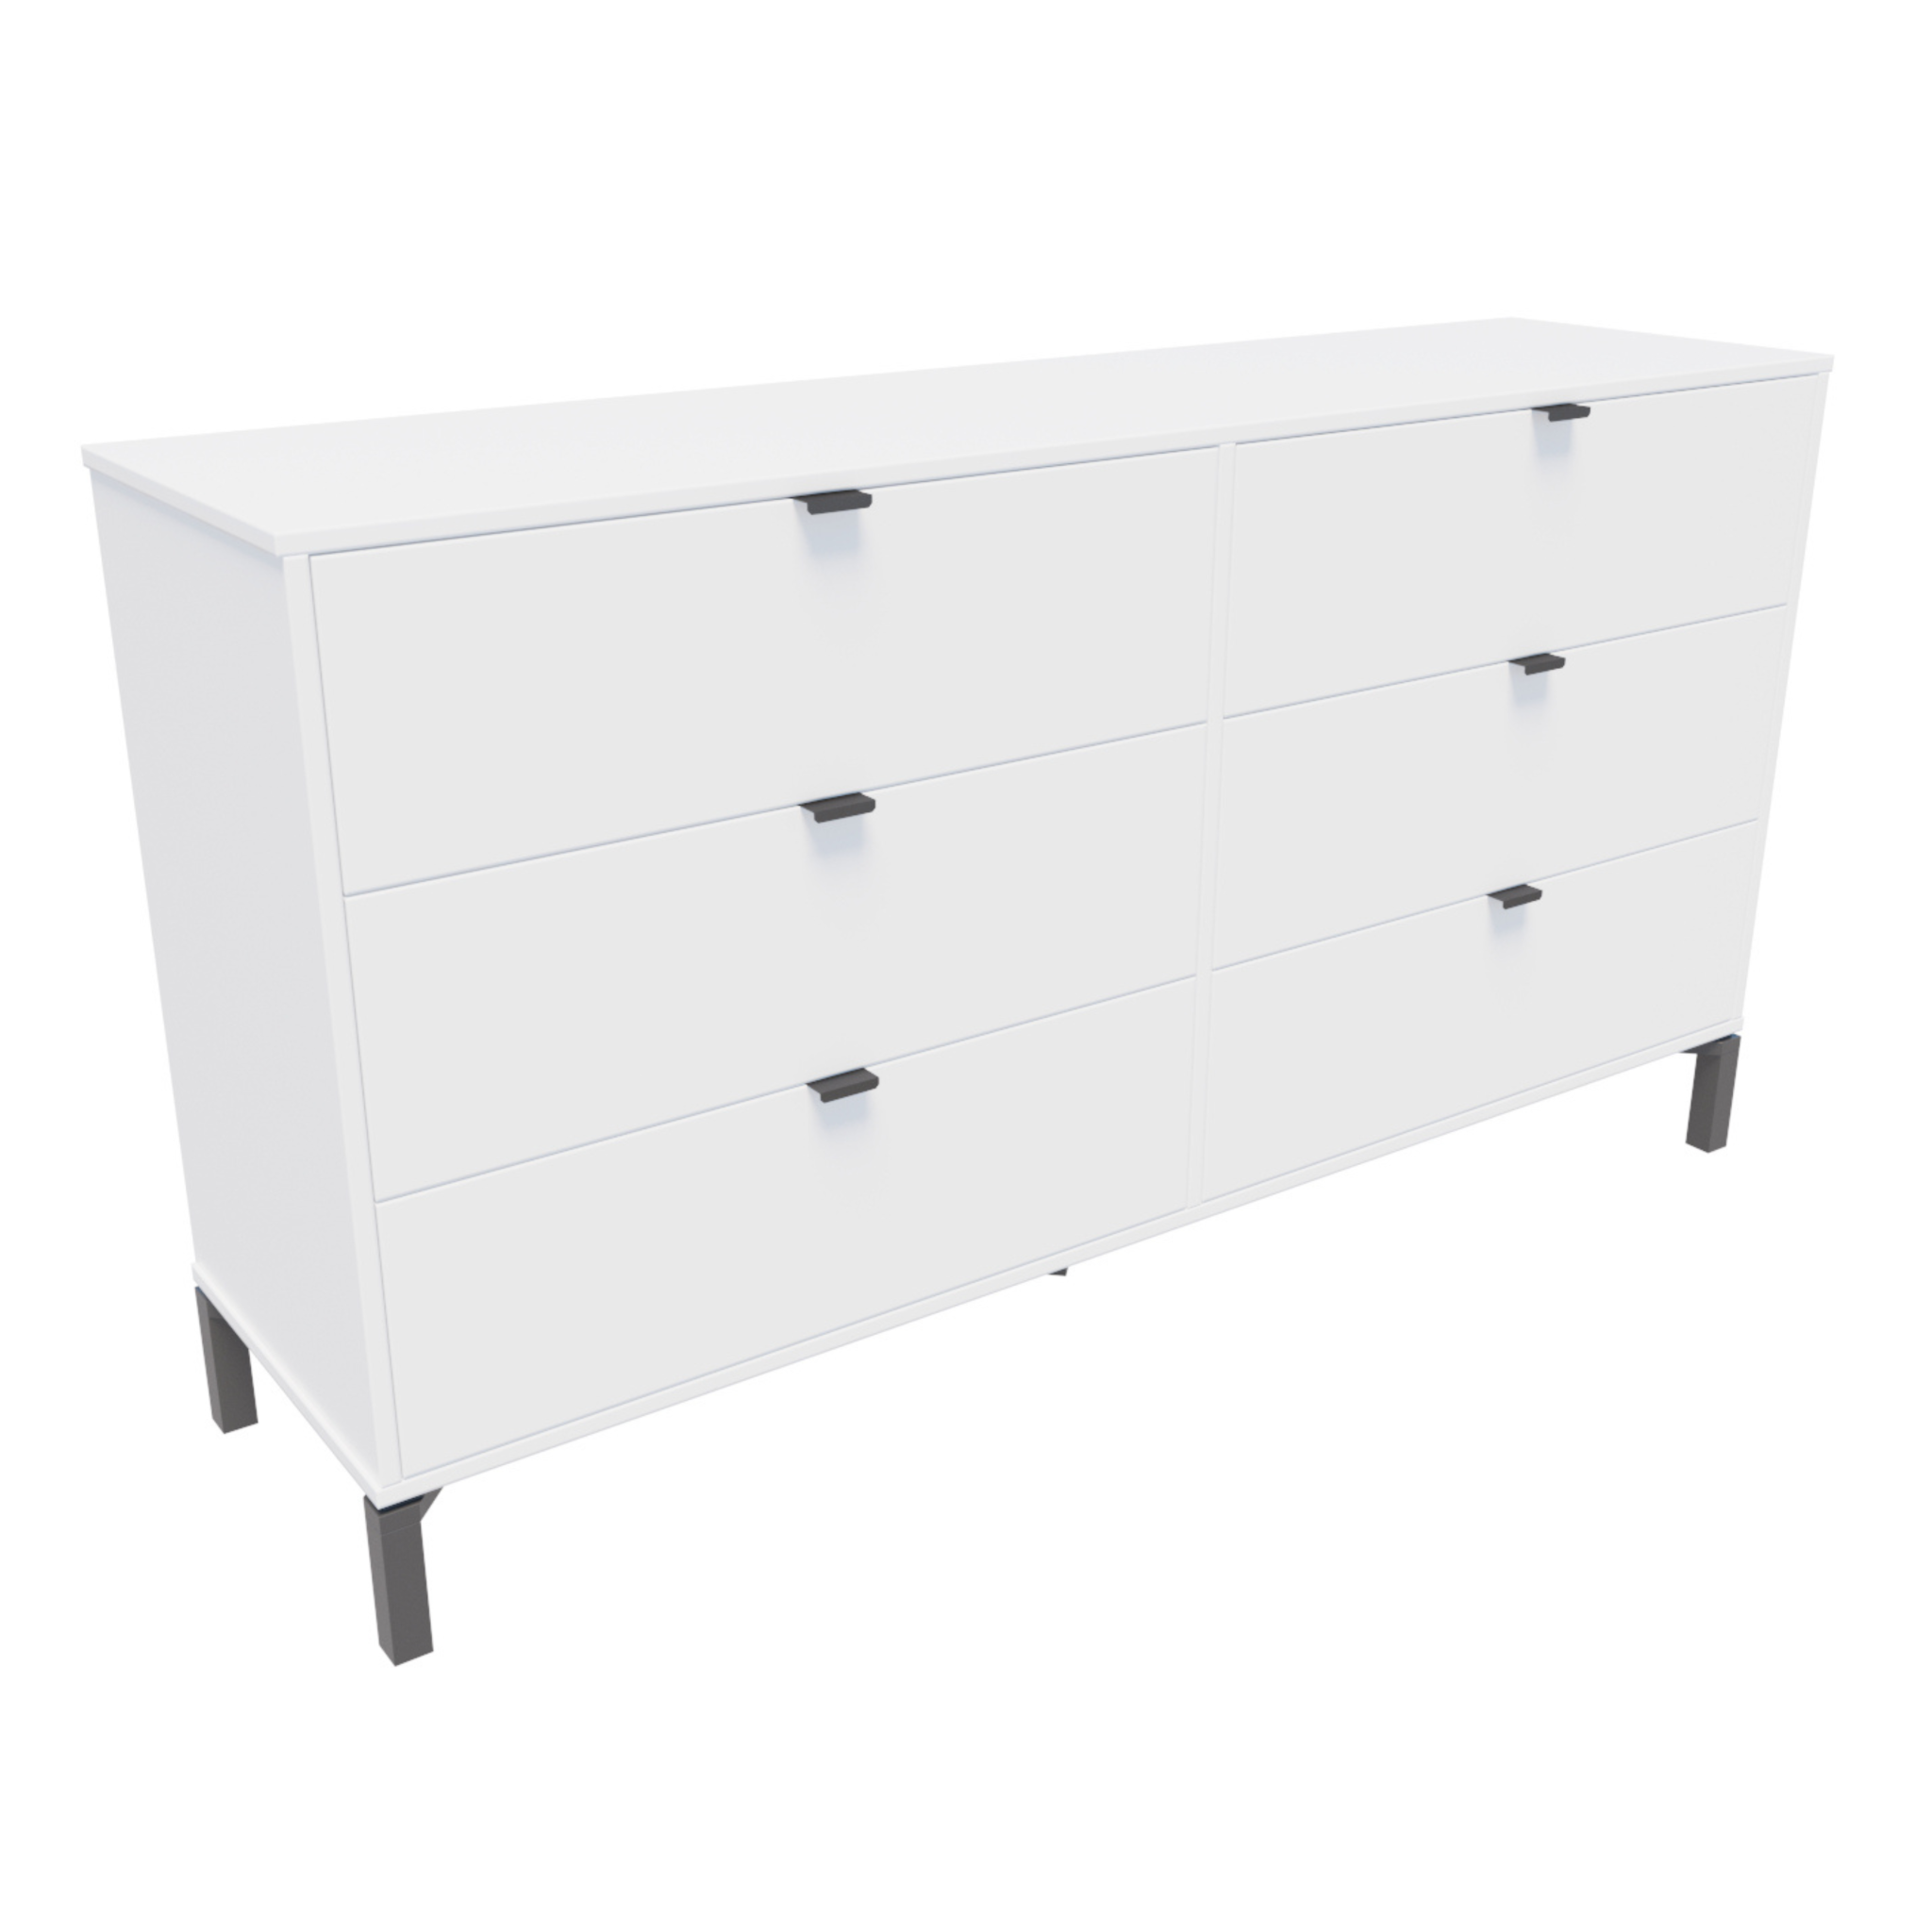 59" White and Black Six Drawer Double Dresser